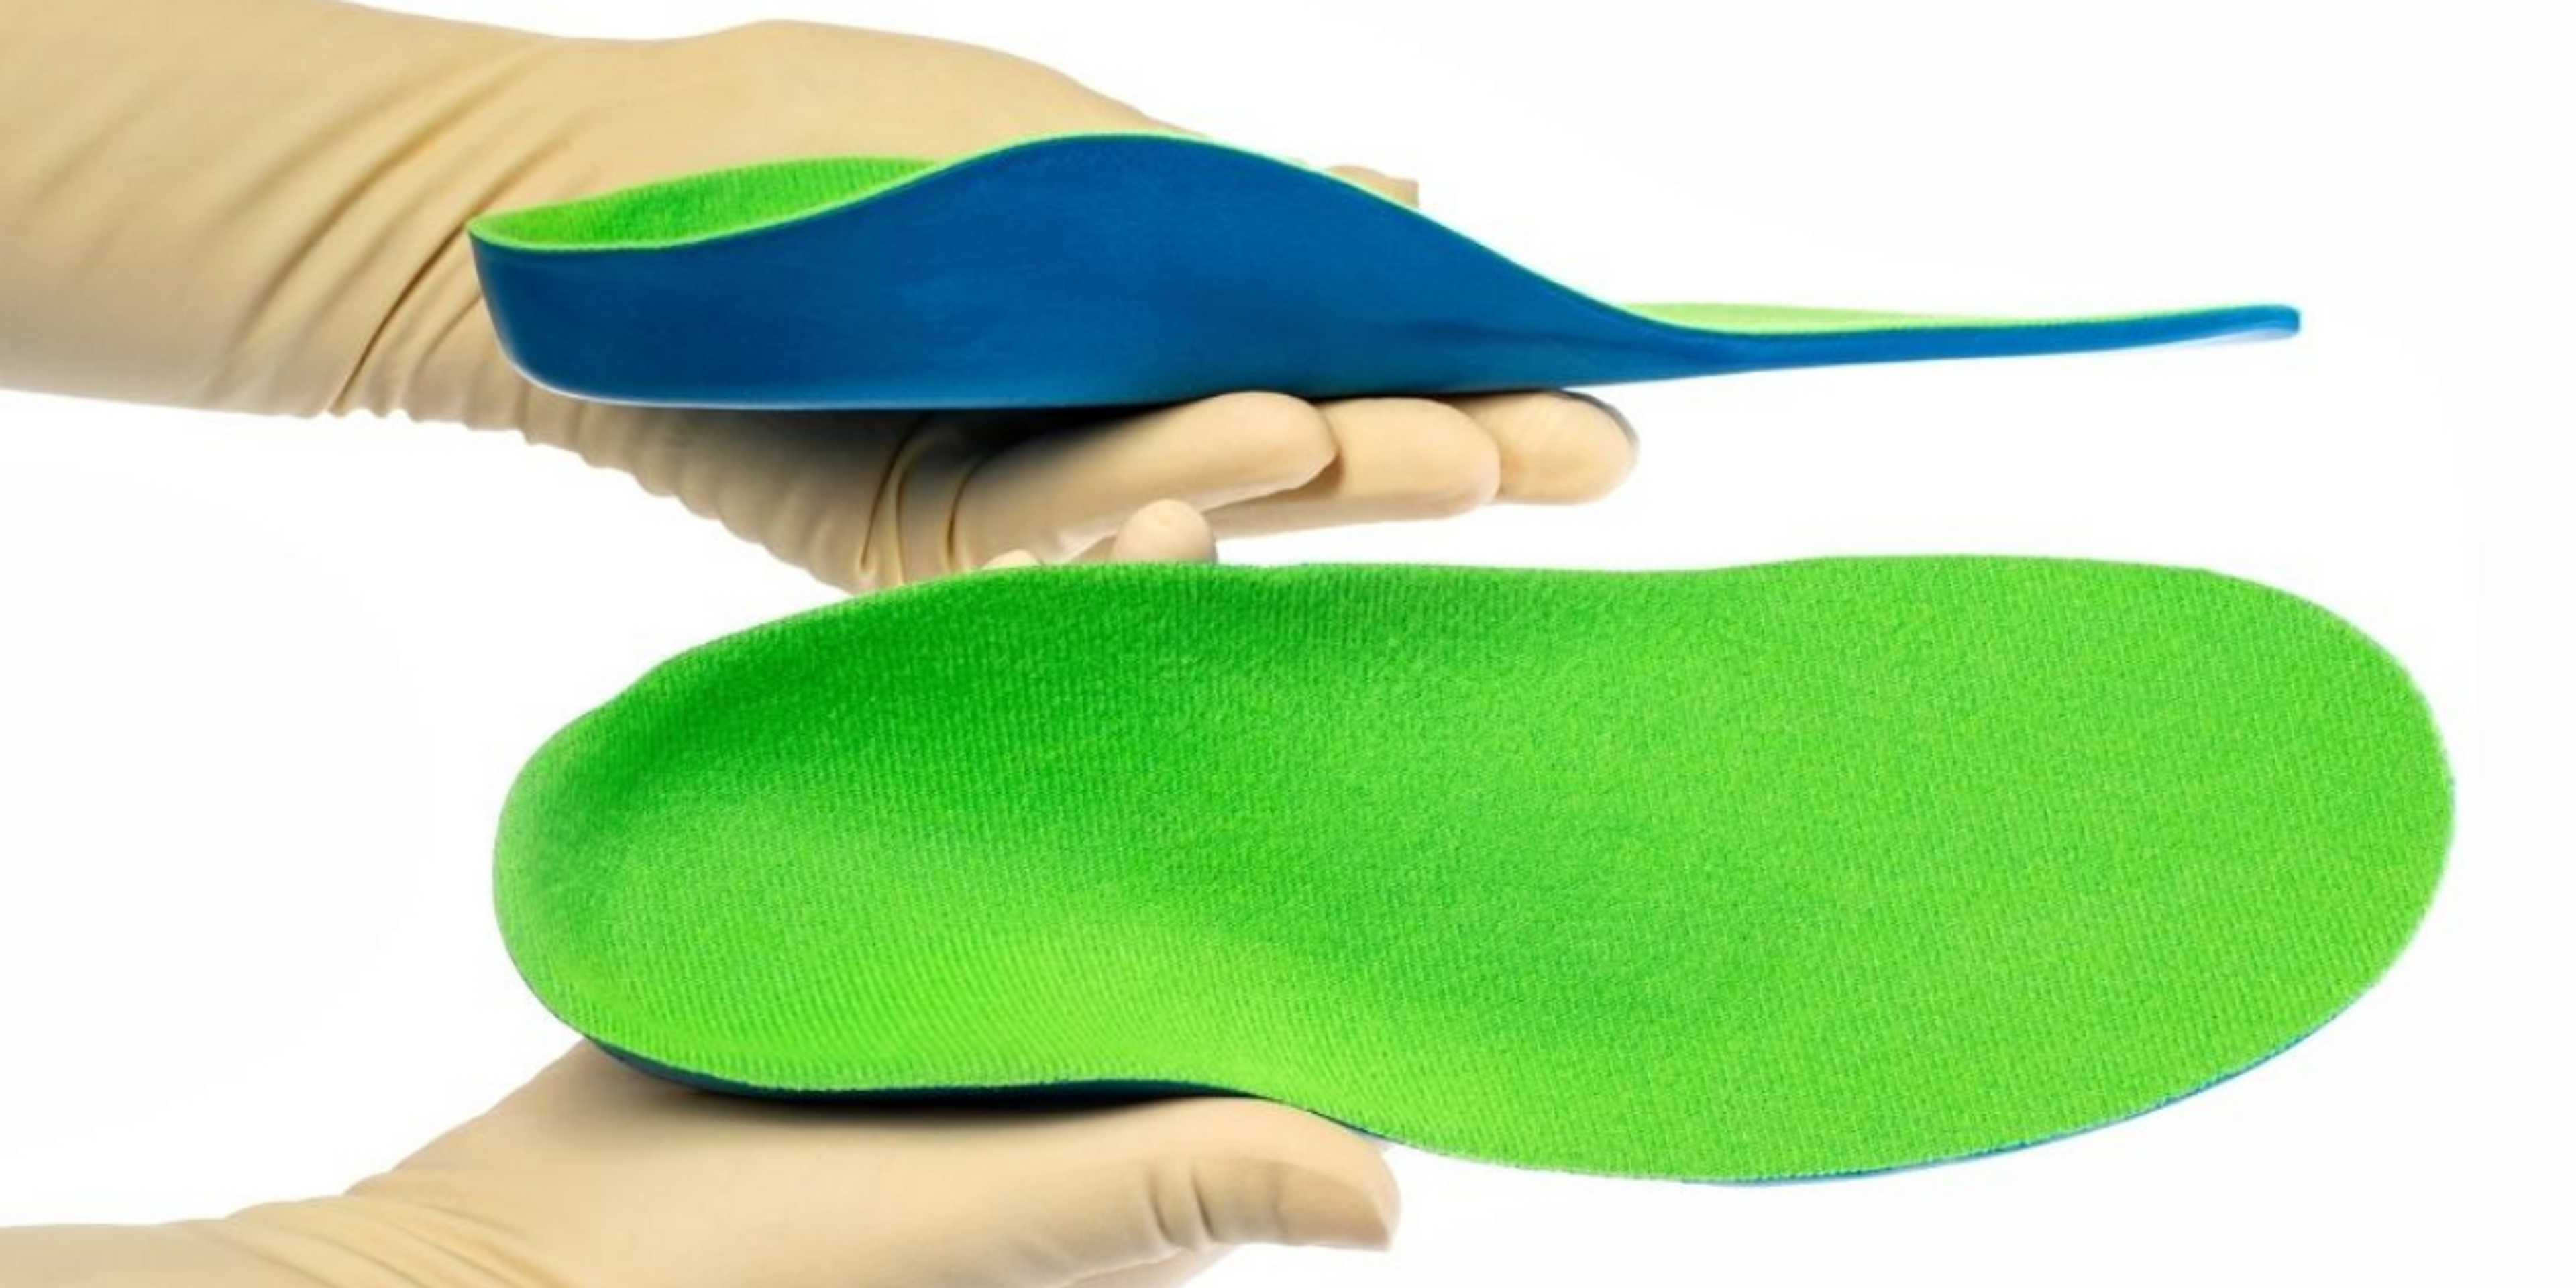 Insoles and orthotics come in different shapes and sizes and are designed to support and cushion the foot.